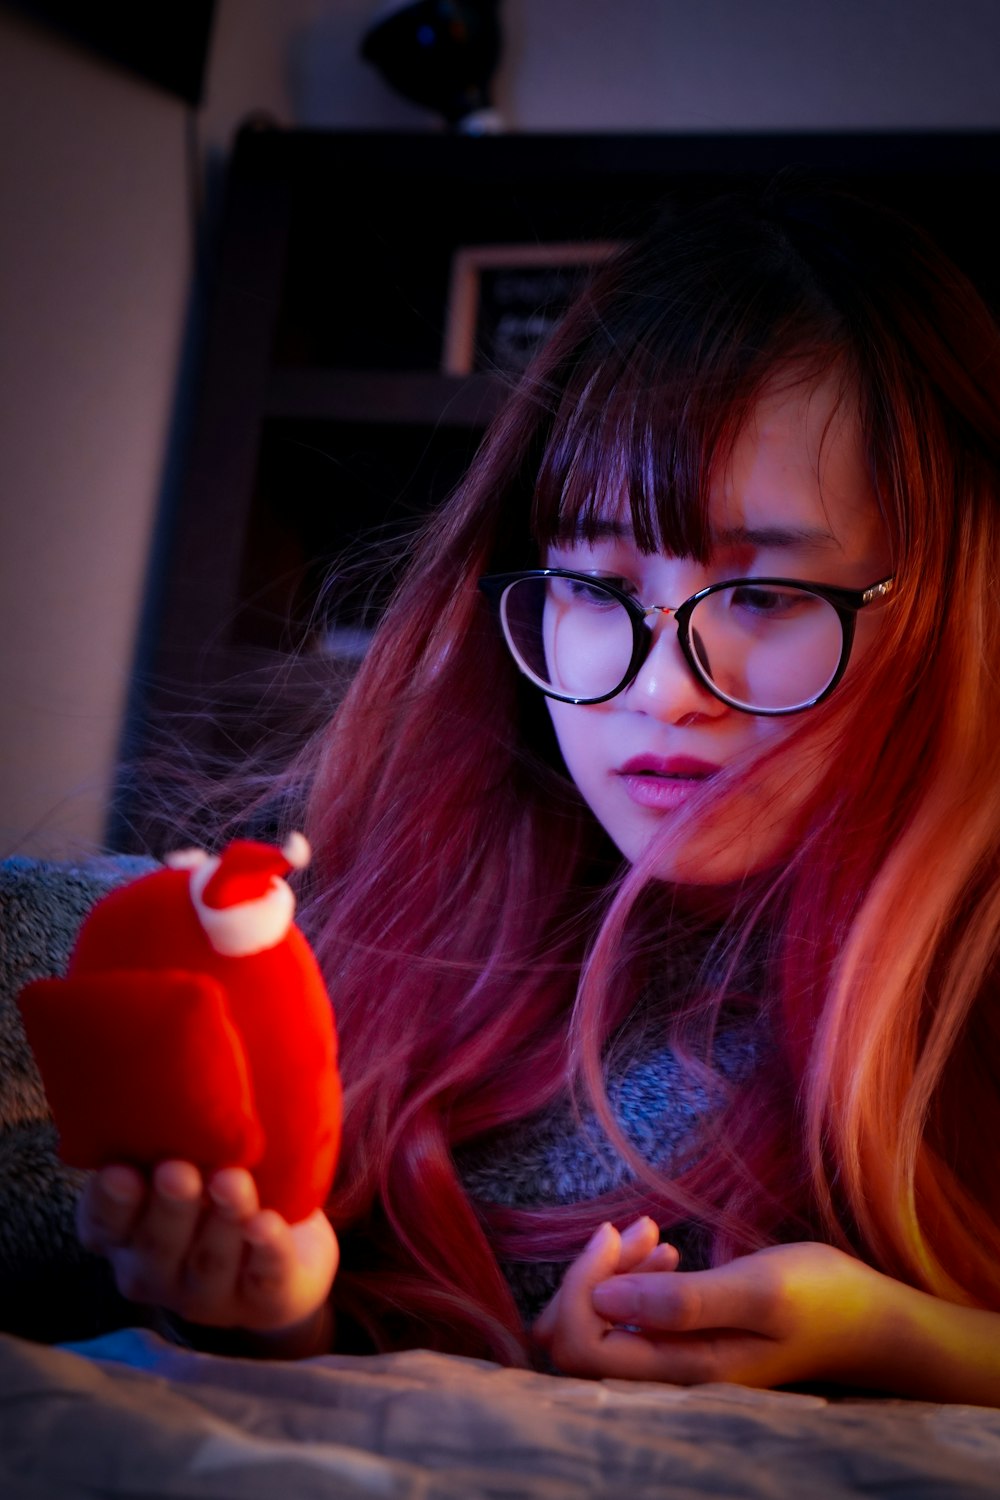 a girl with red hair holding a red toy